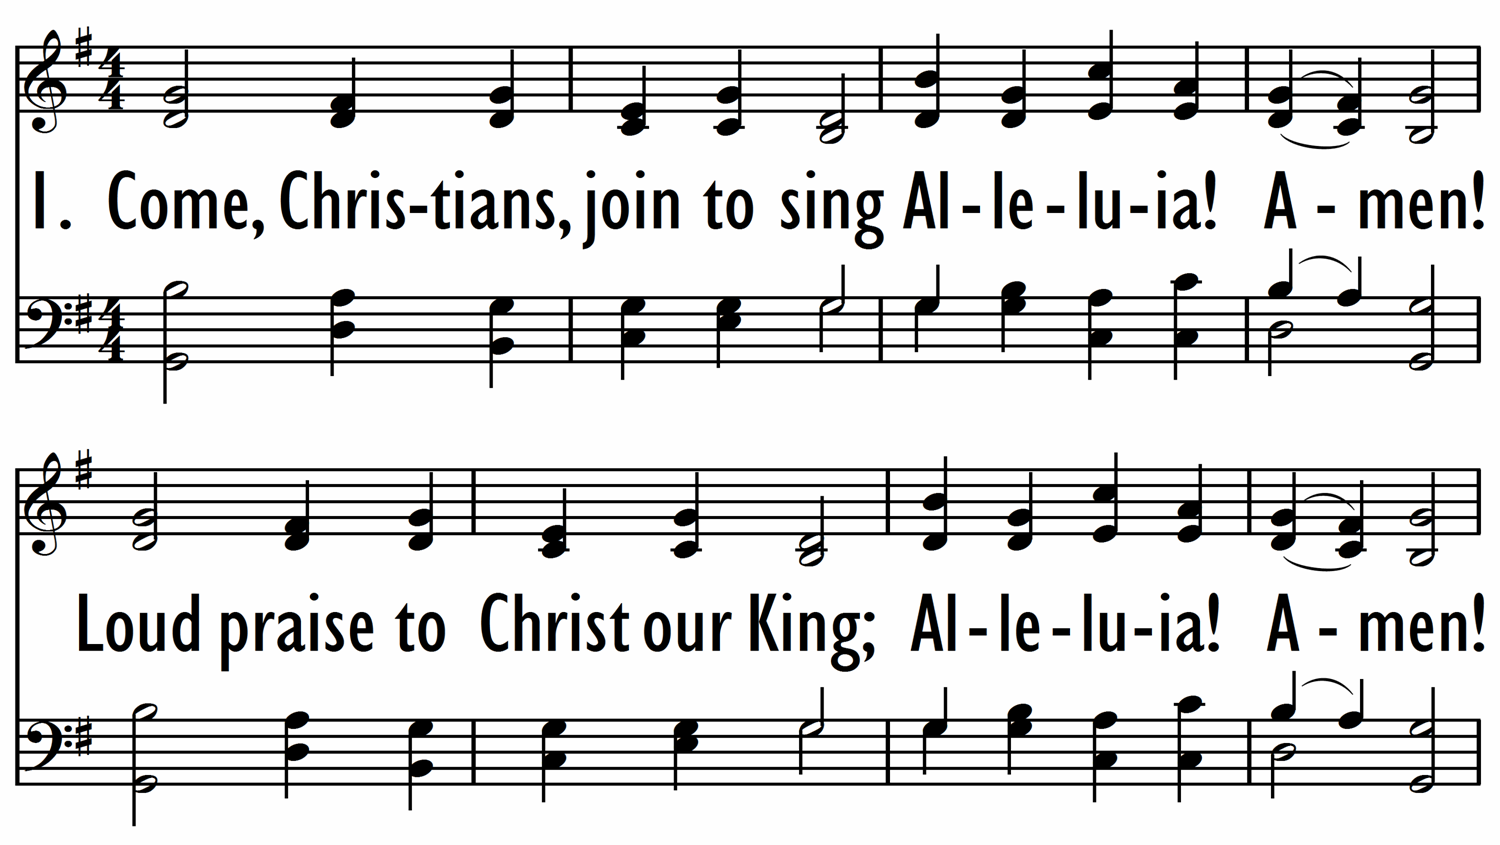 COME, CHRISTIANS, JOIN TO SING-ppt